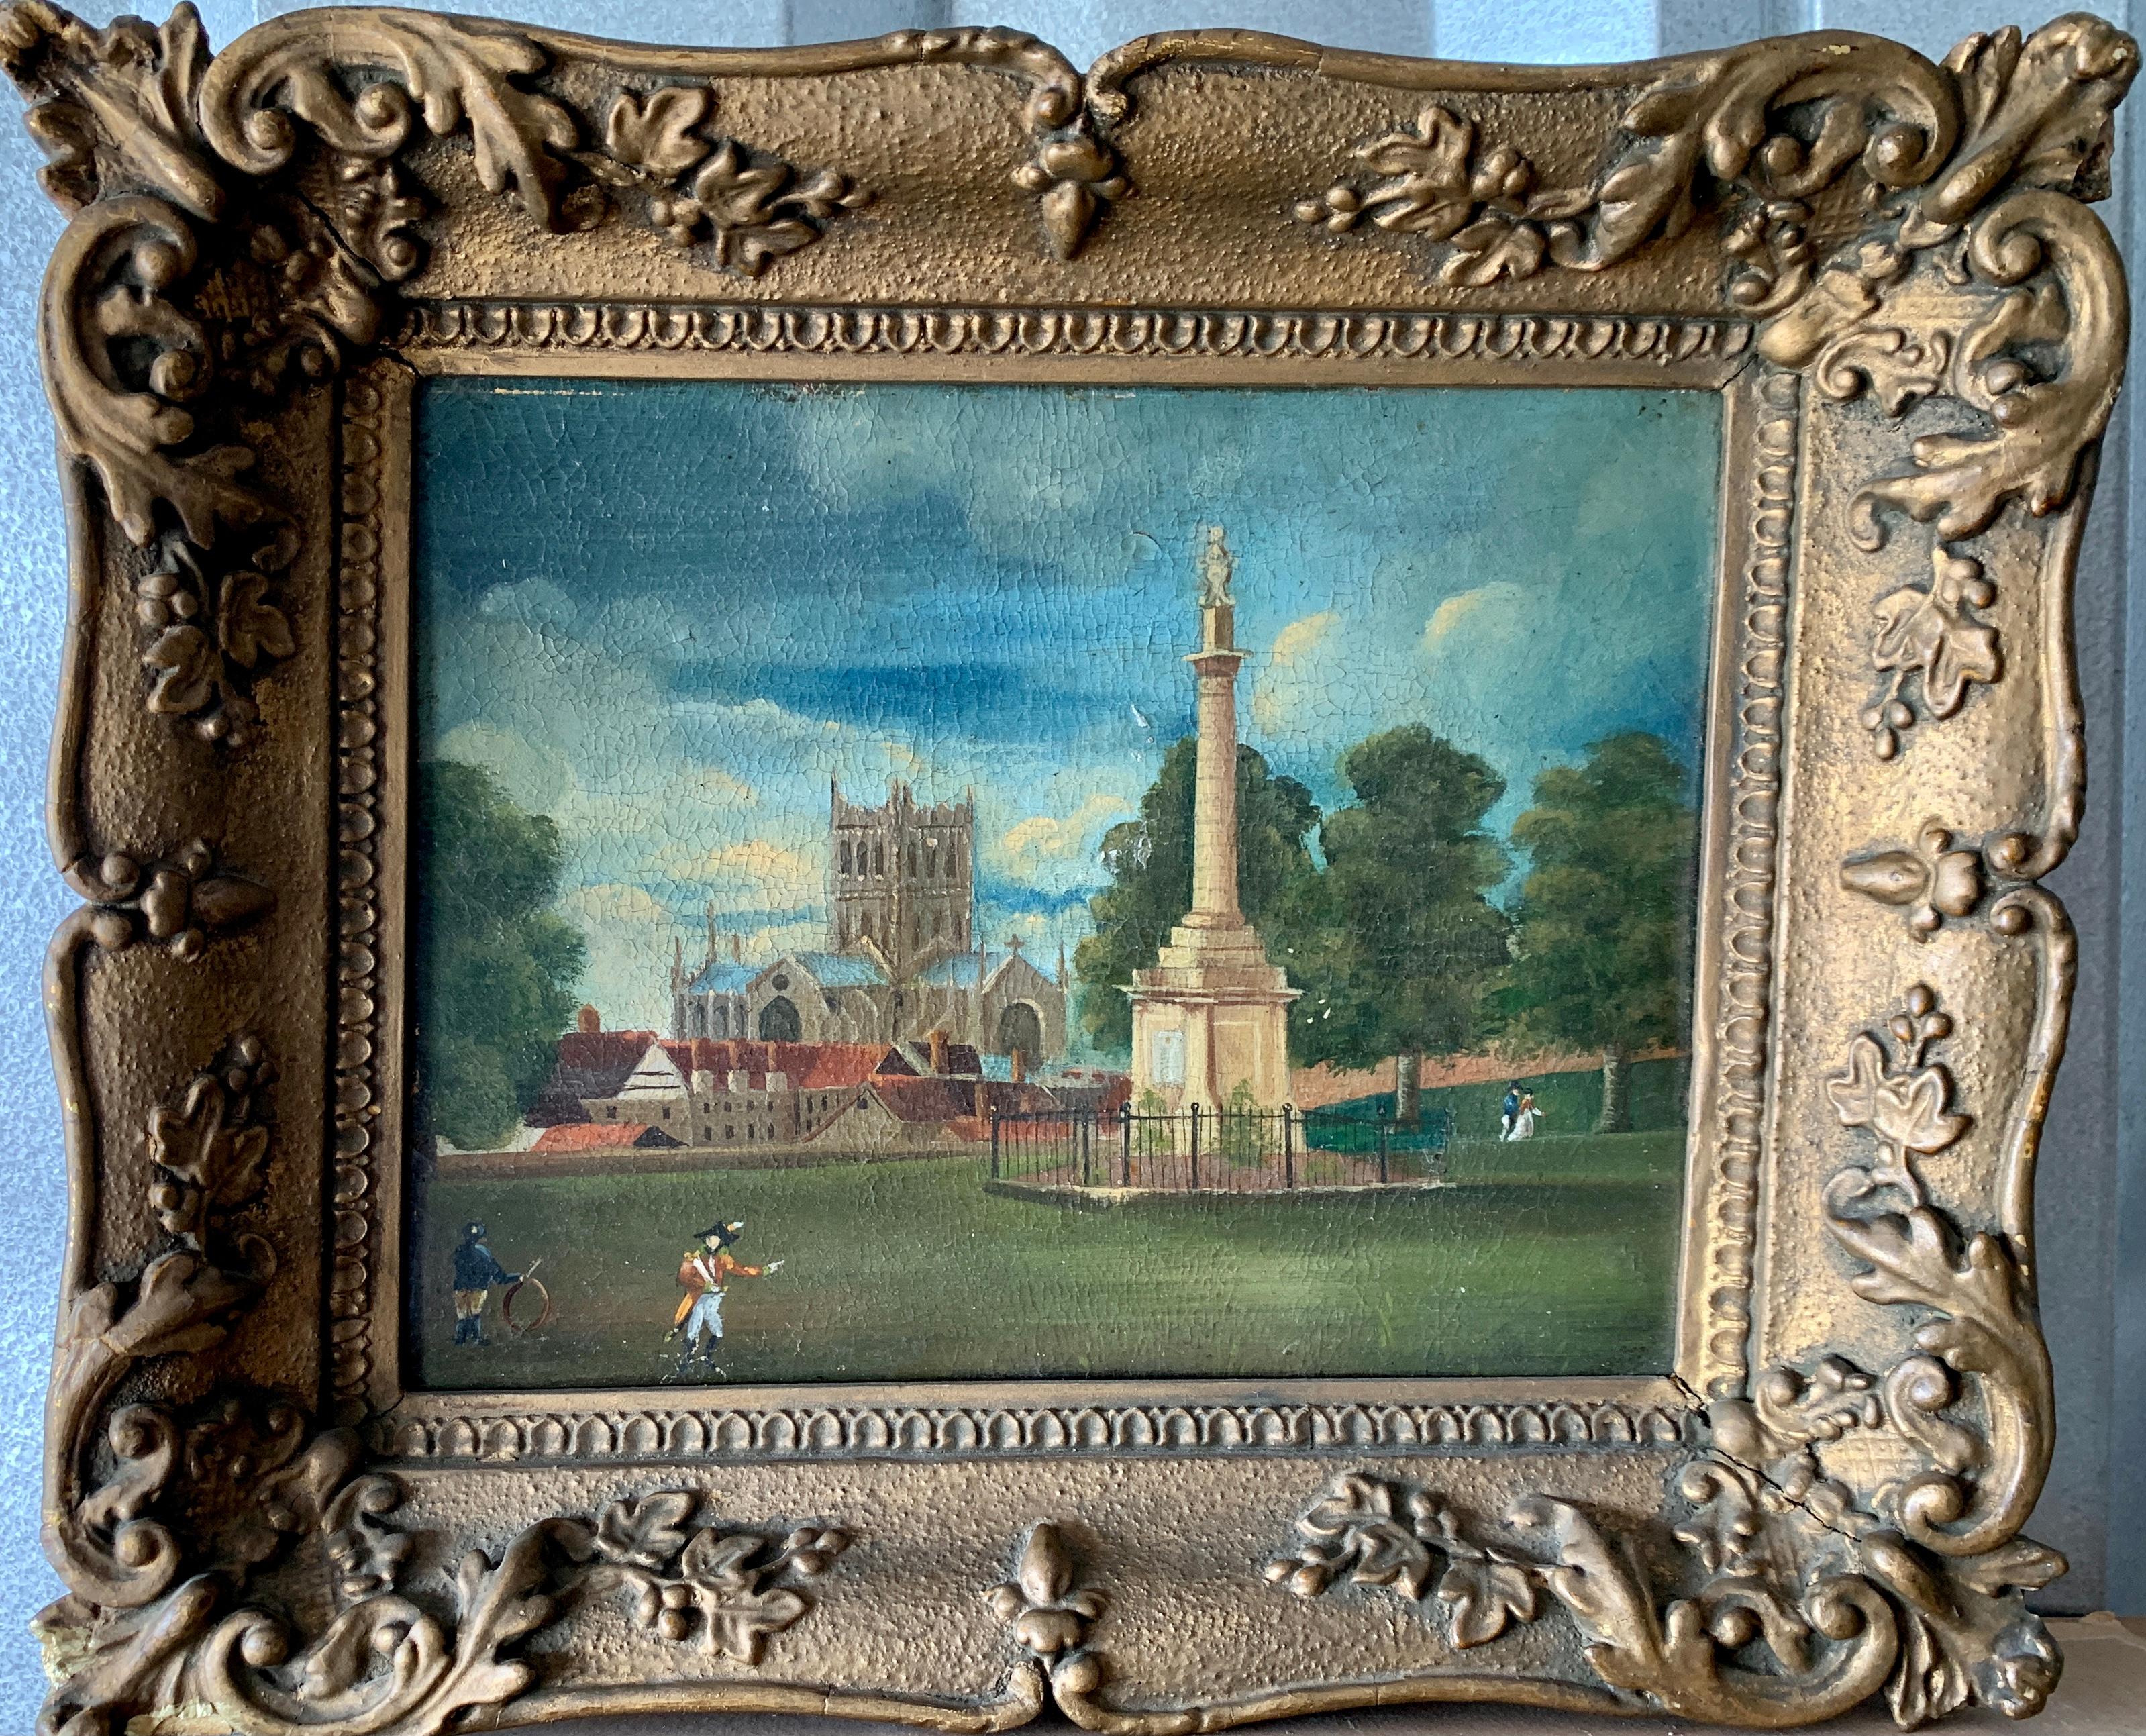 Unknown Landscape Painting - 19th century English folk art, Town scene with soldier my a monument and church